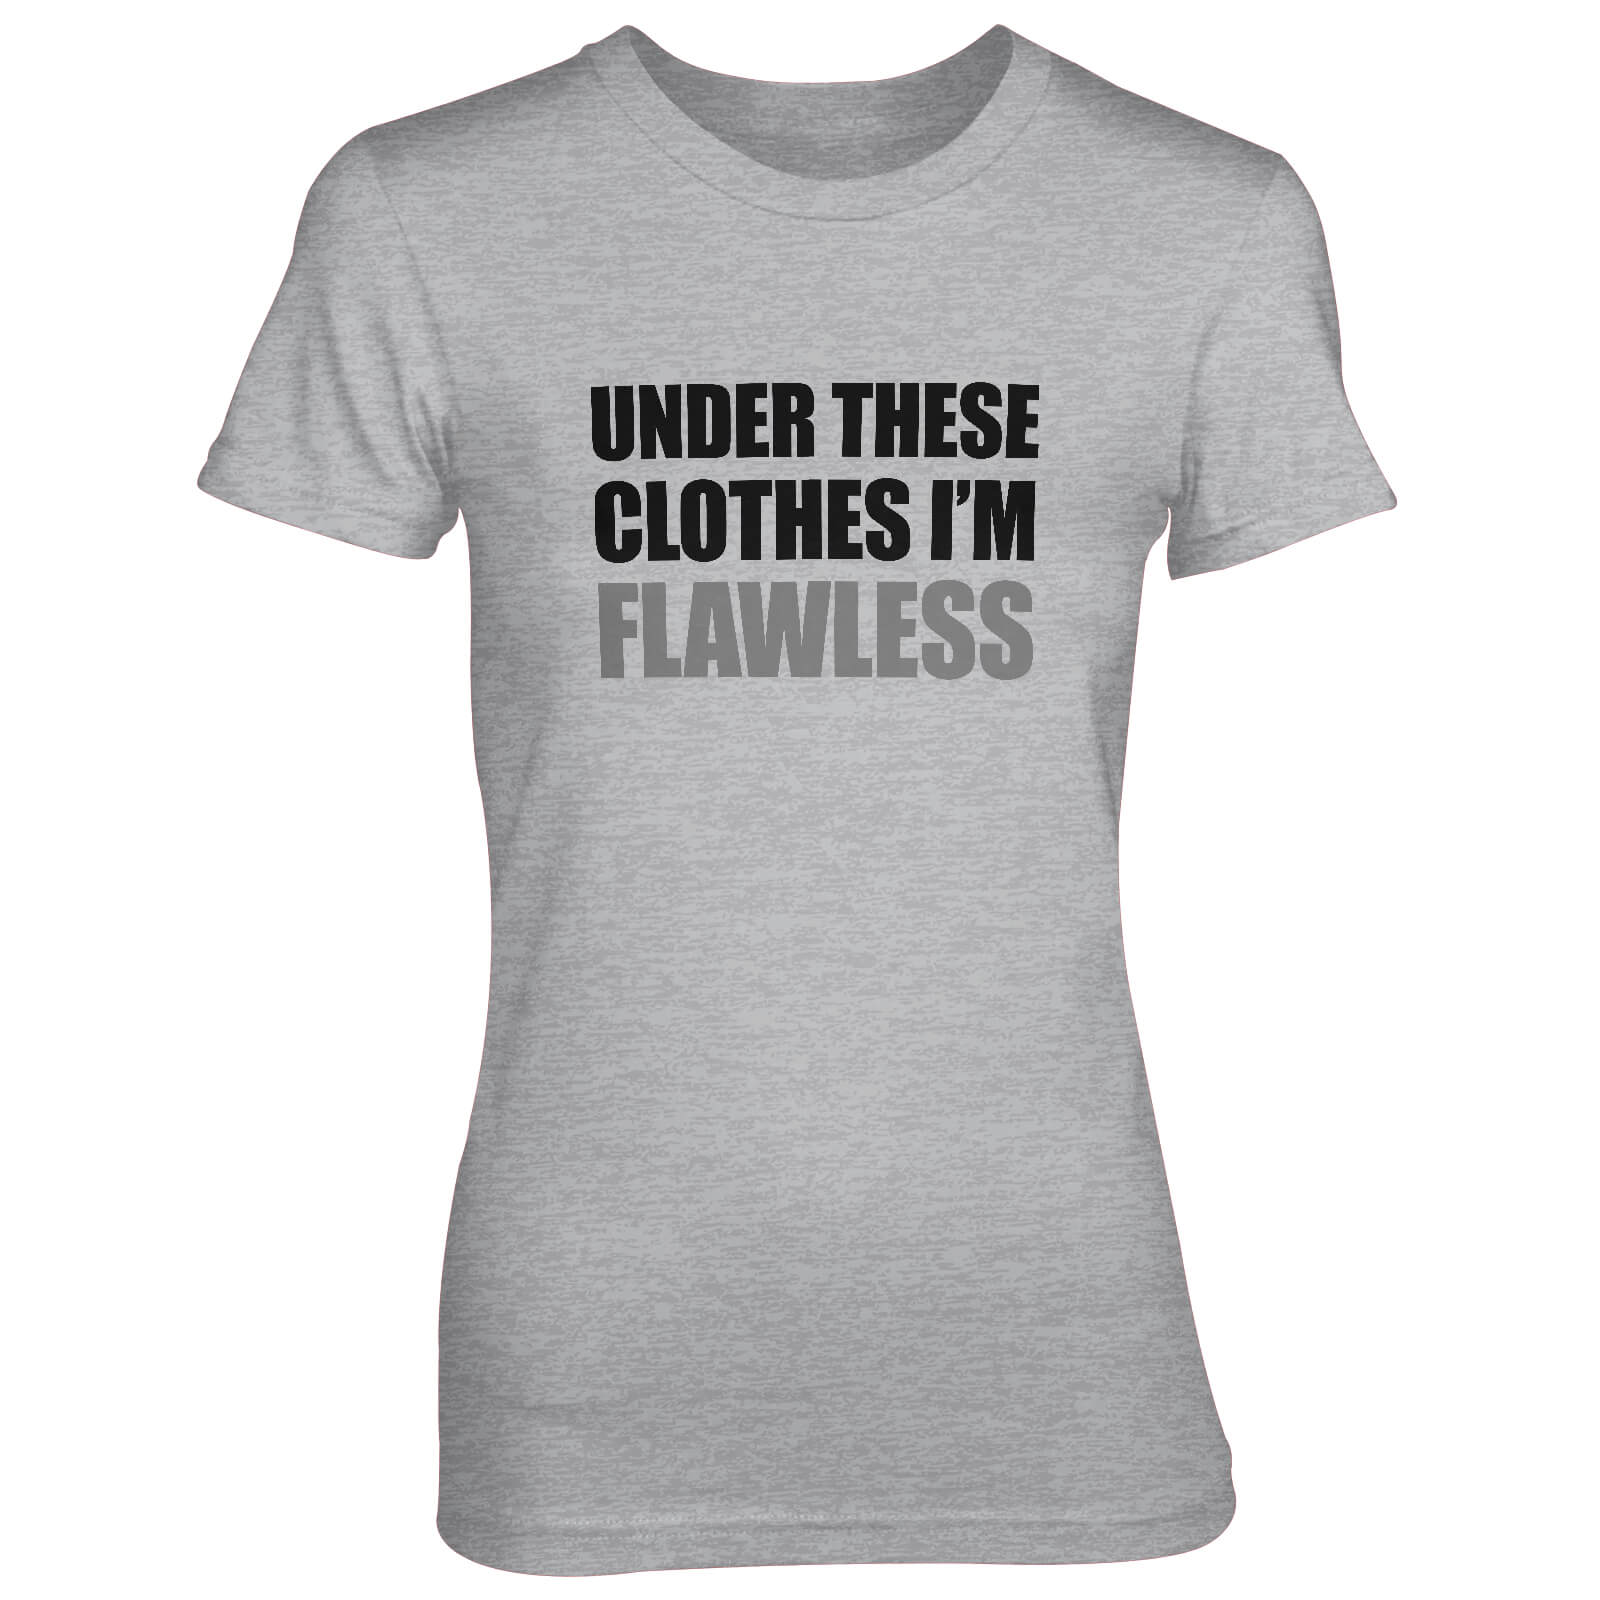 Under These Clothes I'm Flawless Women's Grey T-Shirt - S - Grey